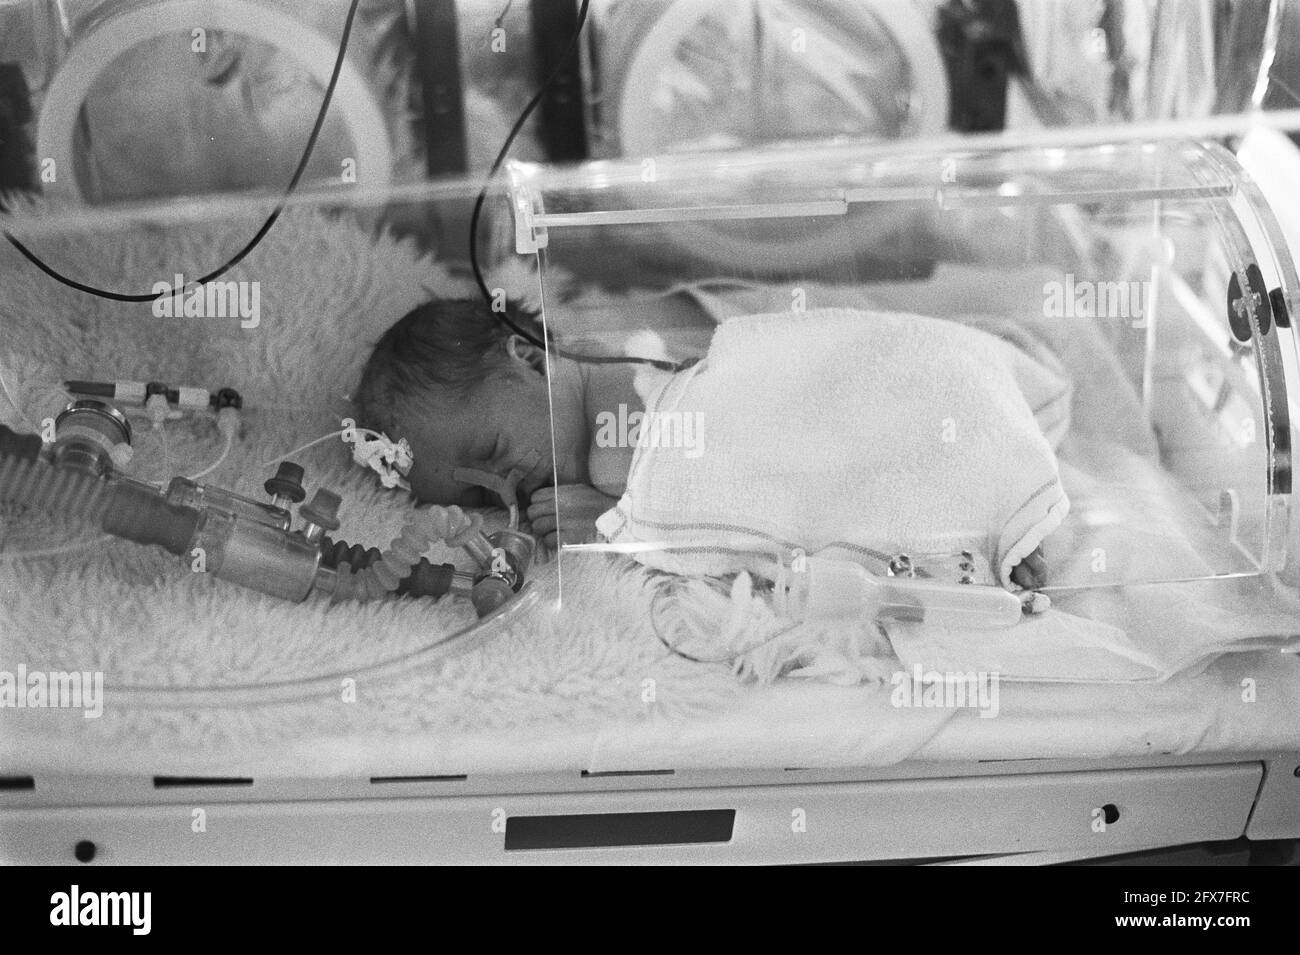 Jasper in the incubator, October 14, 1983, babies, incubators, multiple births, The Netherlands, 20th century press agency photo, news to remember, documentary, historic photography 1945-1990, visual stories, human history of the Twentieth Century, capturing moments in time Stock Photo